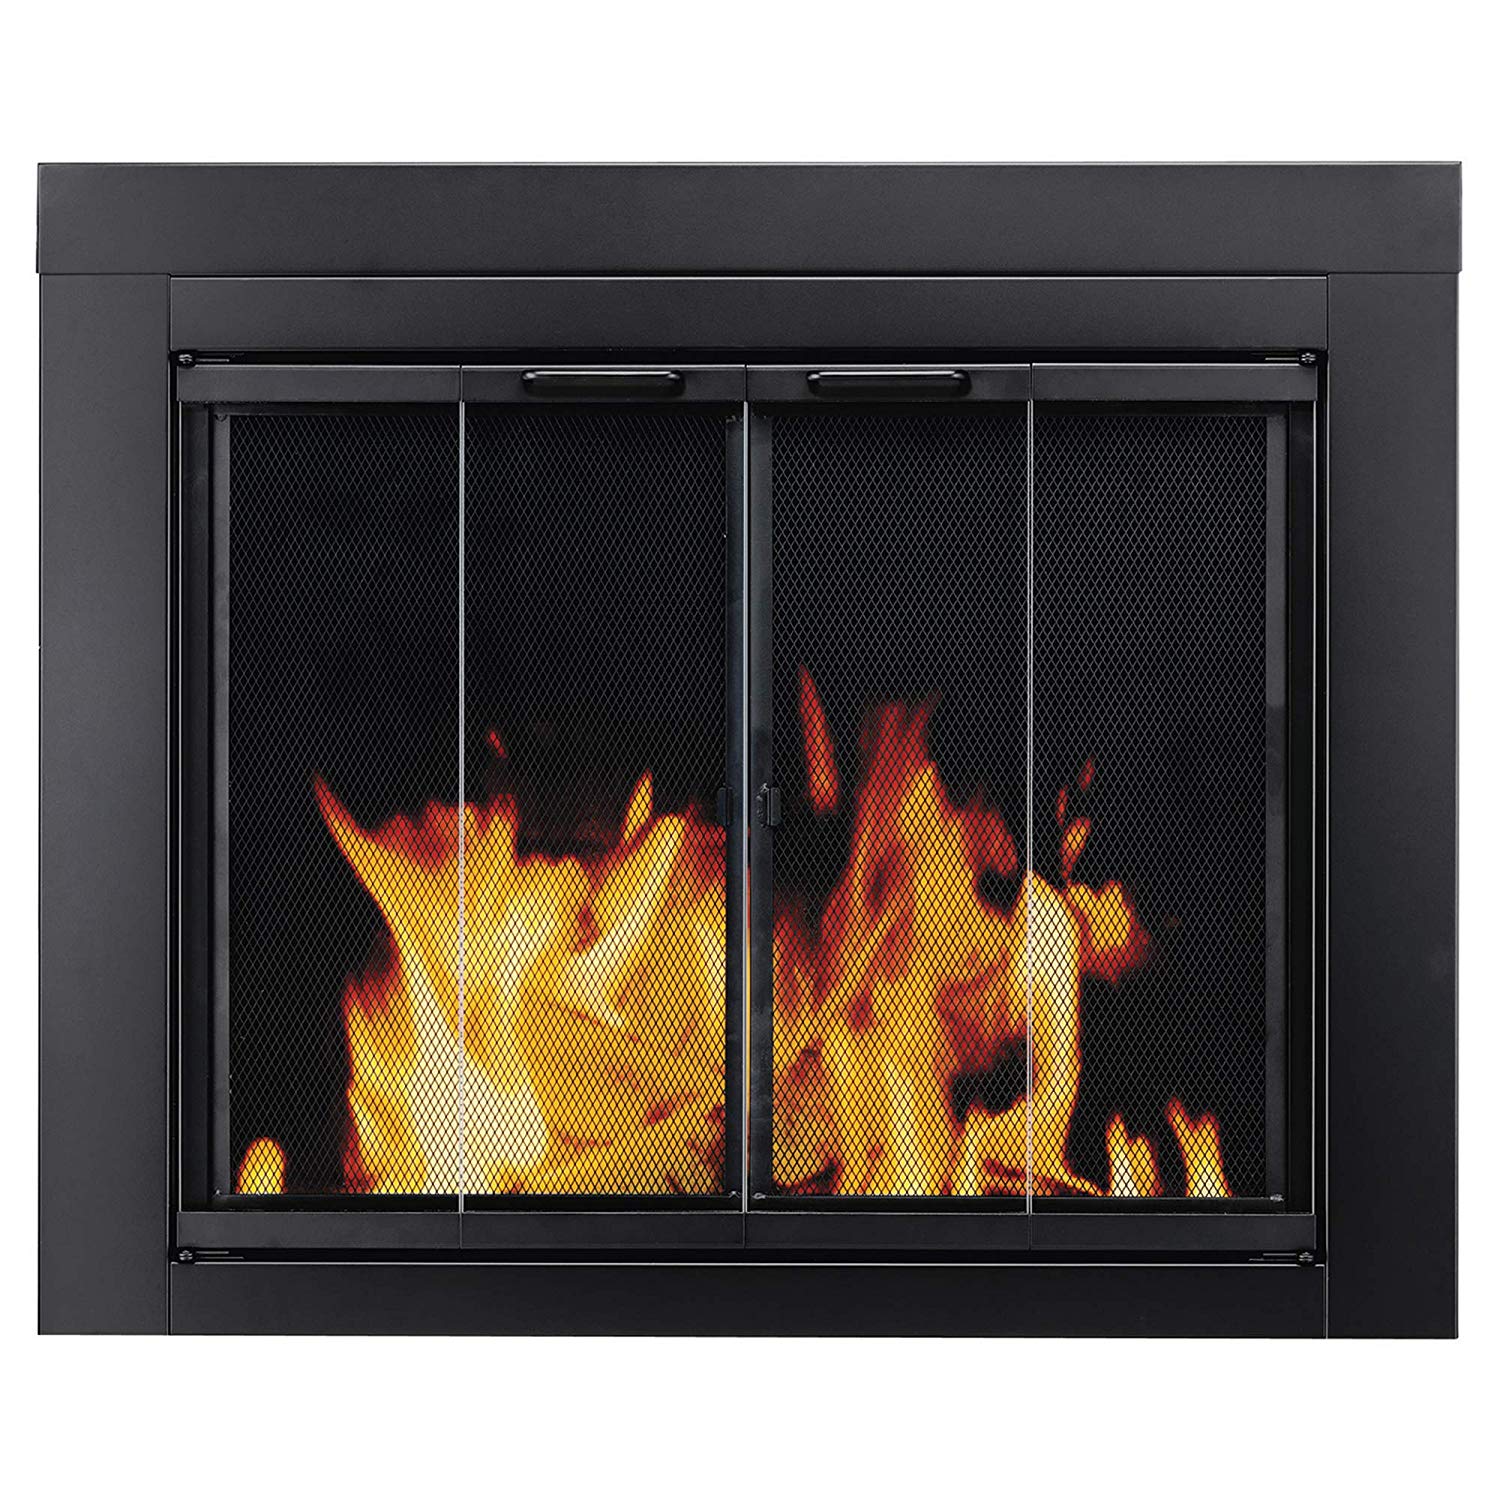 Prefab Fireplace Insert Lovely Pleasant Hearth at 1000 ascot Fireplace Glass Door Black Small